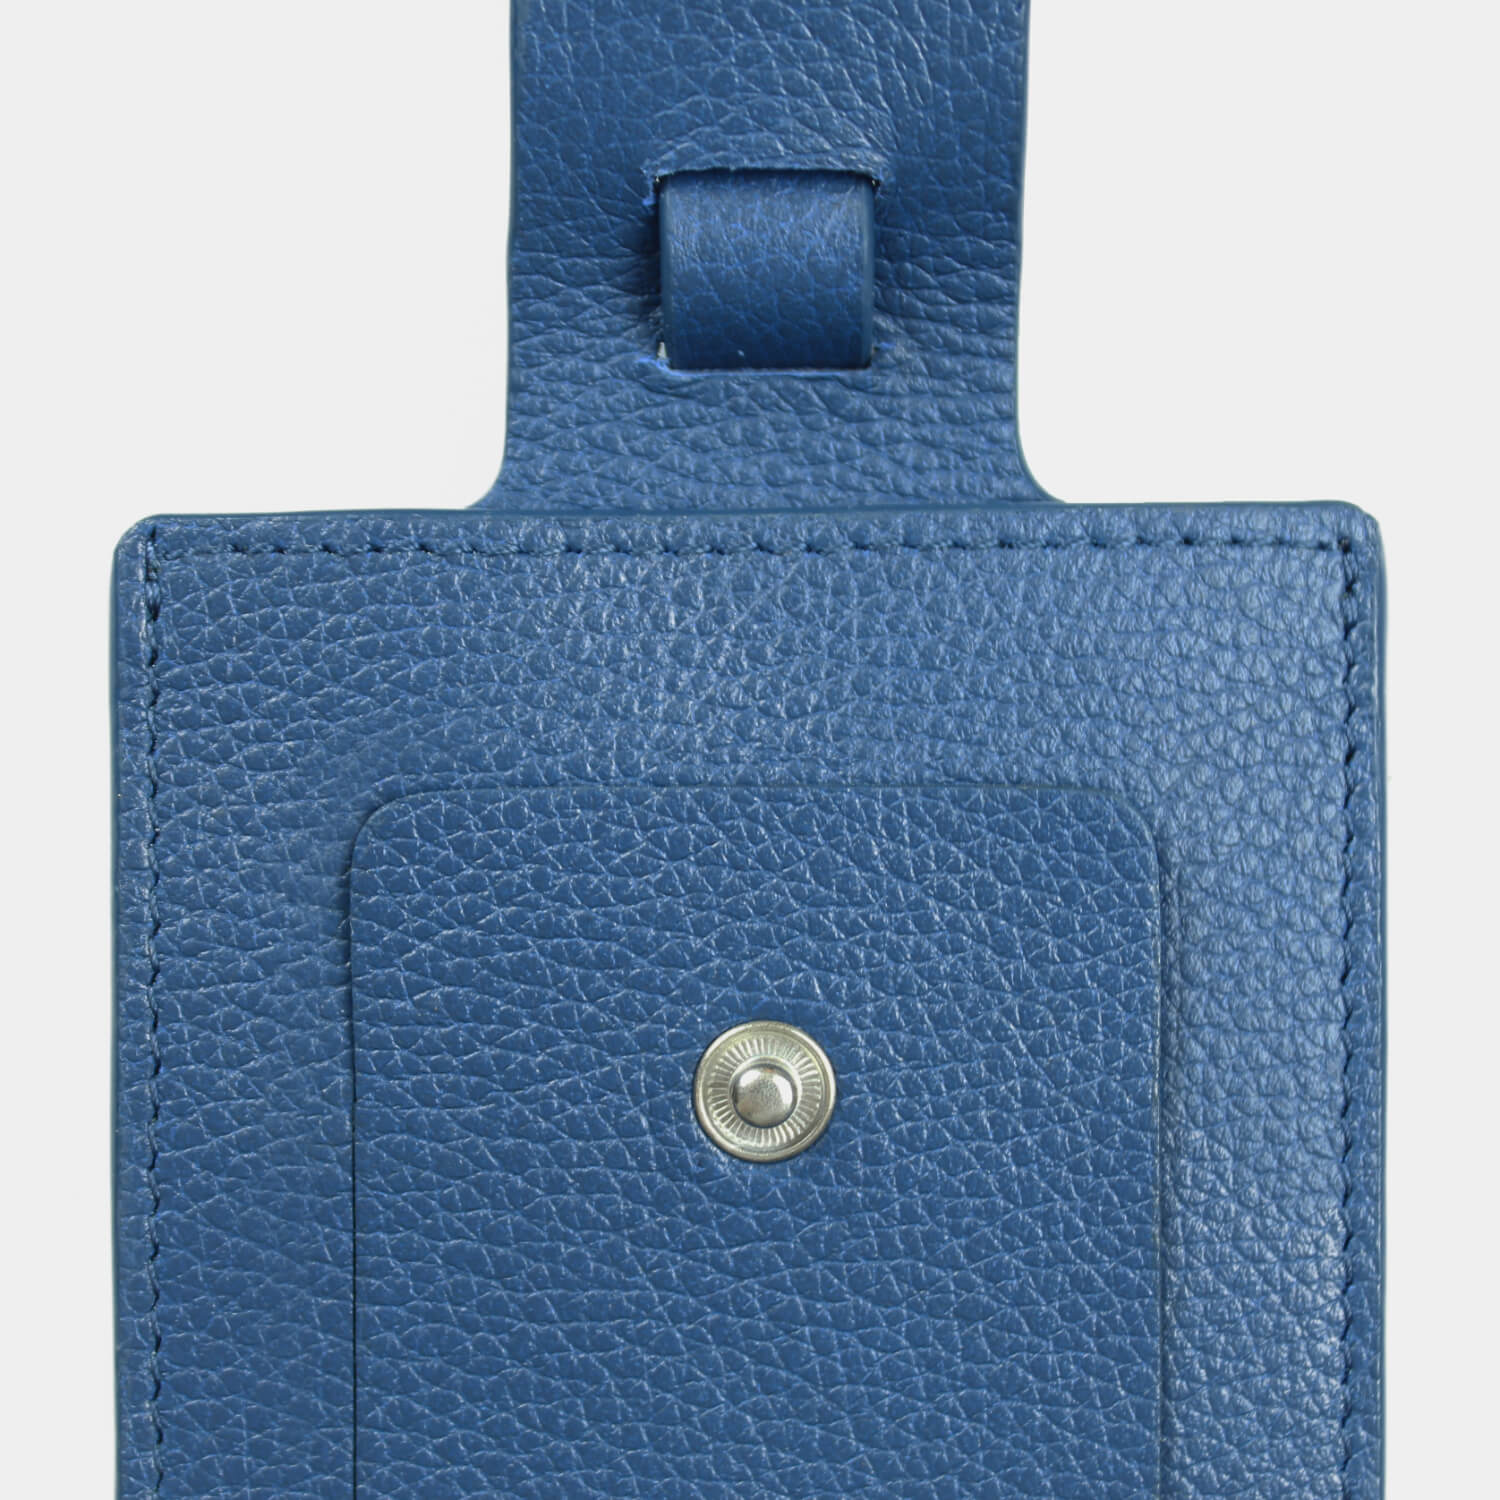 Fine grain leather luggage tag with popper and contact details form